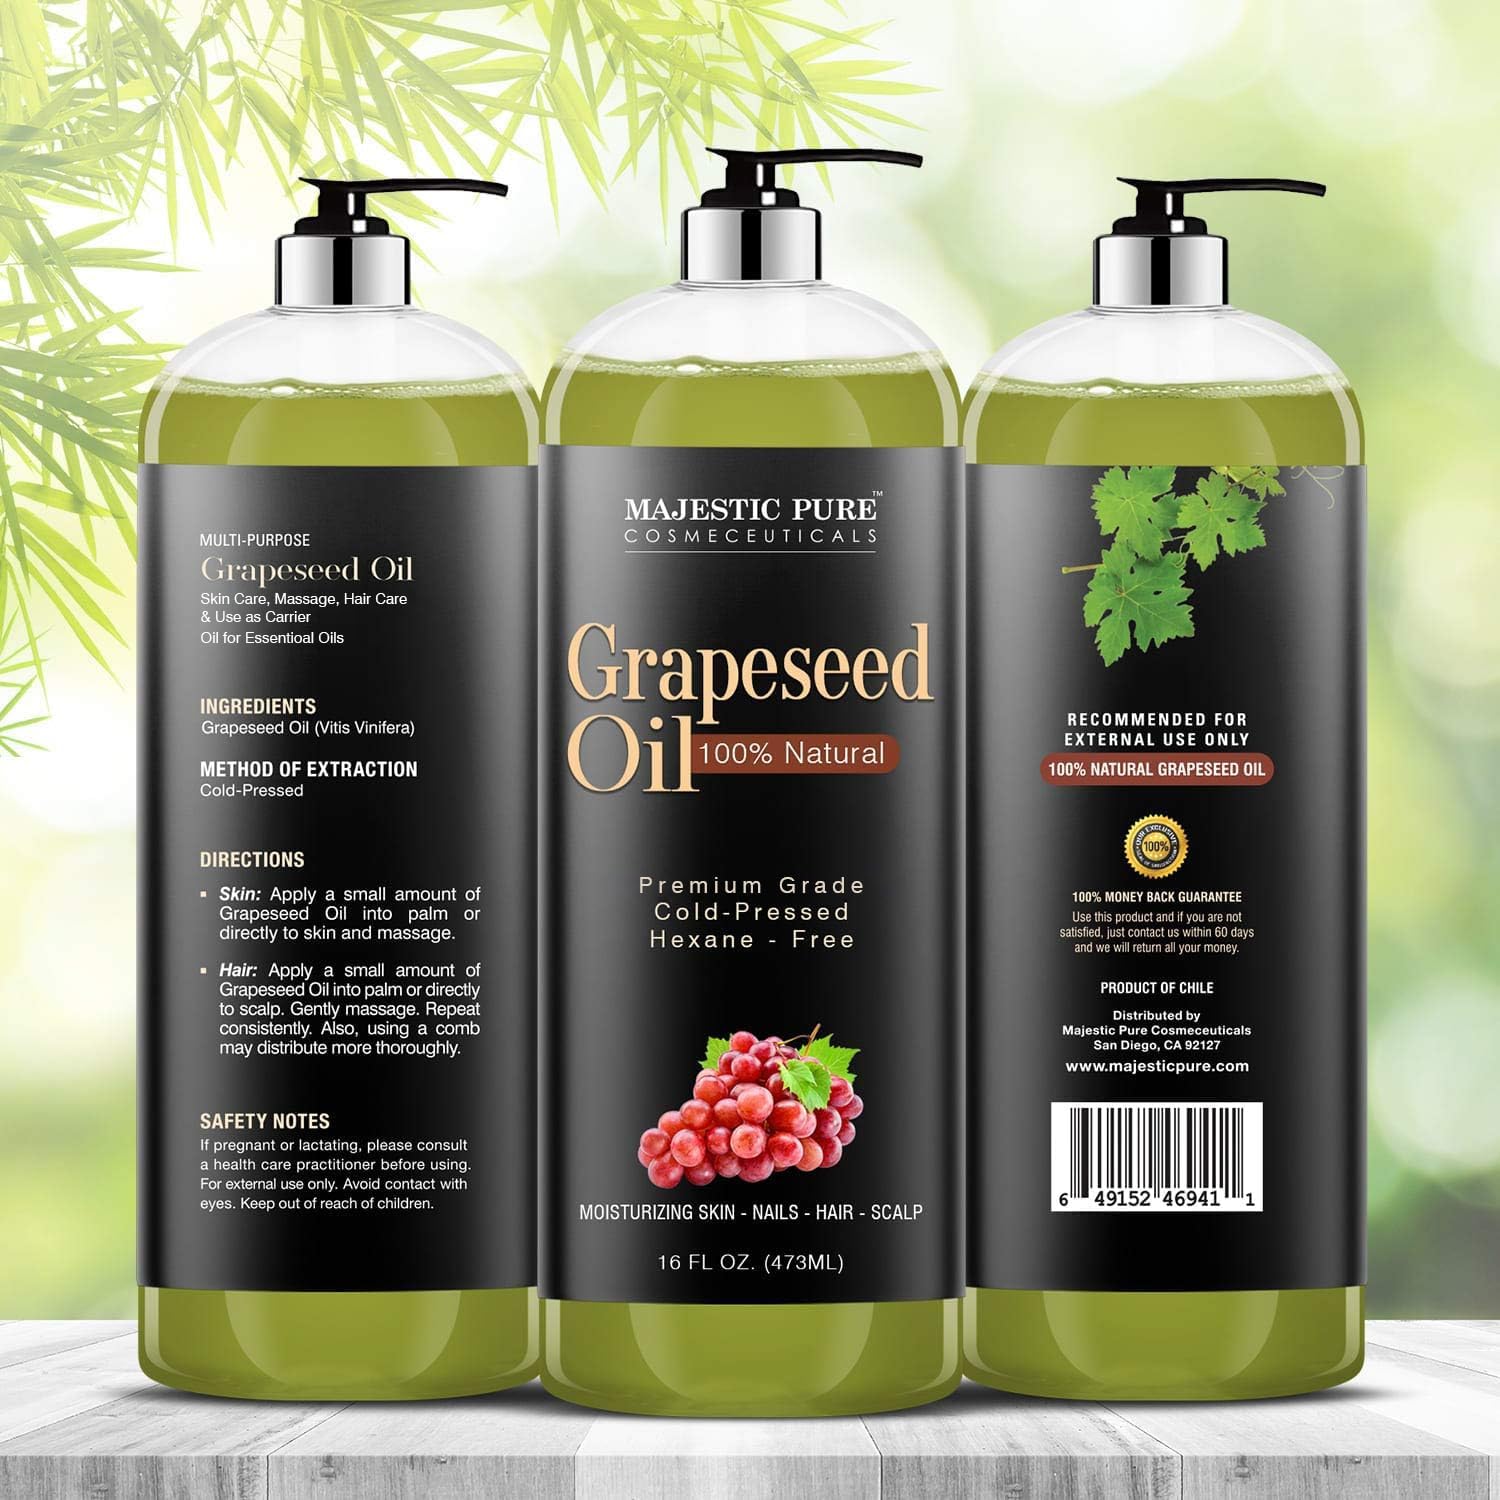 MAJESTIC PURE Grapeseed Oil, Pure & Natural Massage and Carrier Oil, Skin Care for Sensitive Skin, Light Silky Moisturizer for All Skin Types - 16 fl. oz. : Beauty & Personal Care